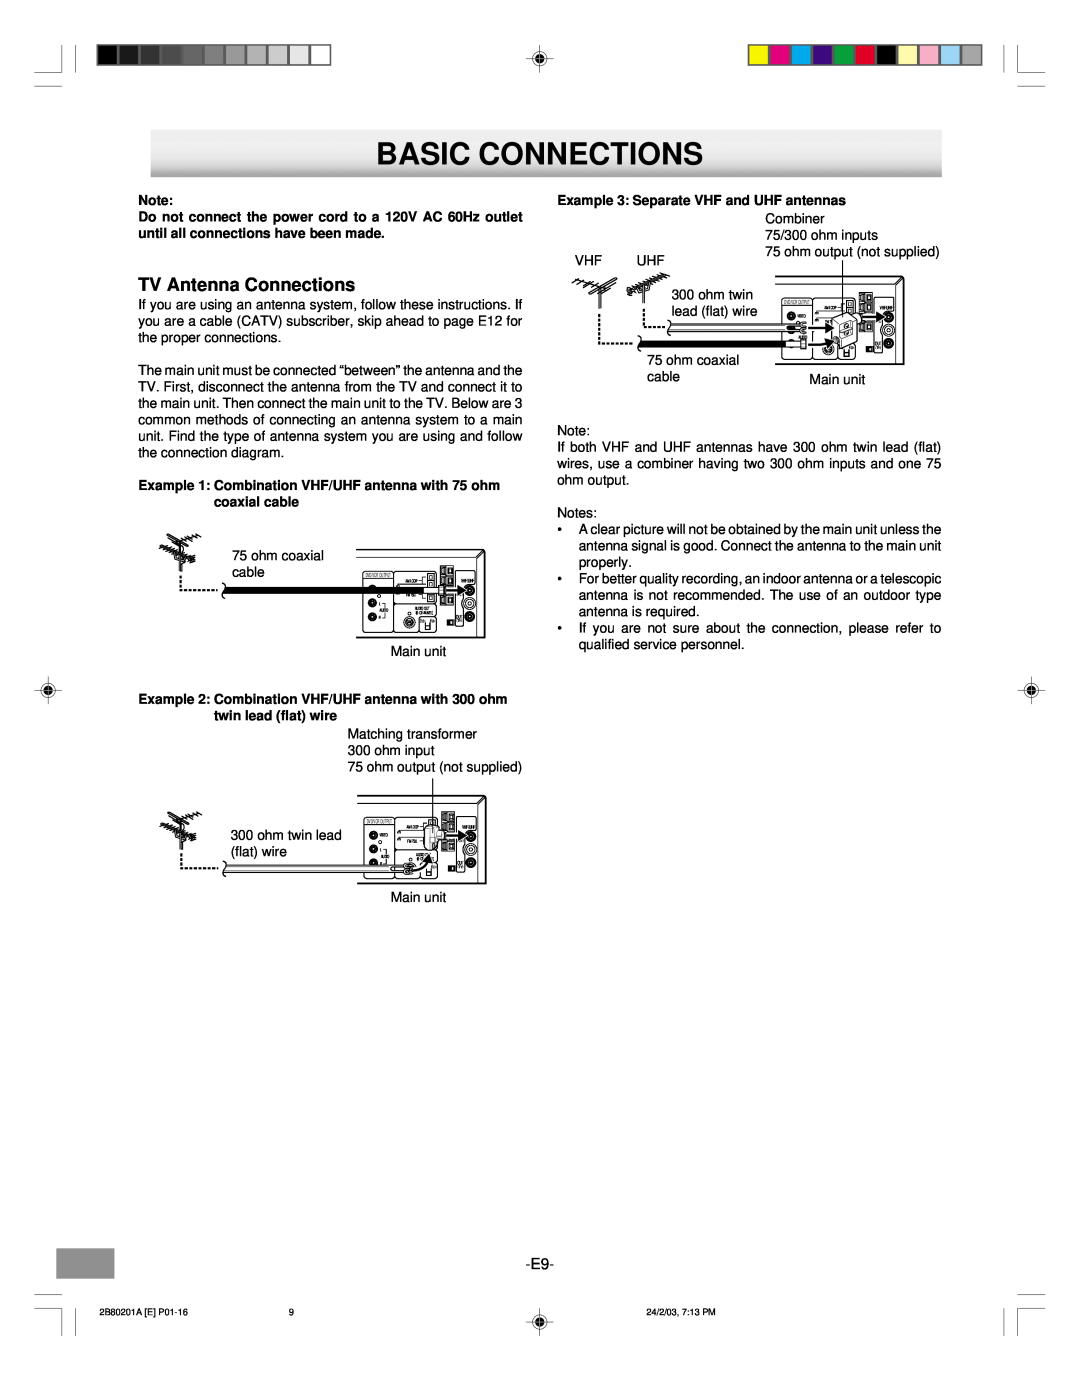 Sanyo DWM-3500 instruction manual Basic Connections, TV Antenna Connections, Example 3 Separate VHF and UHF antennas 